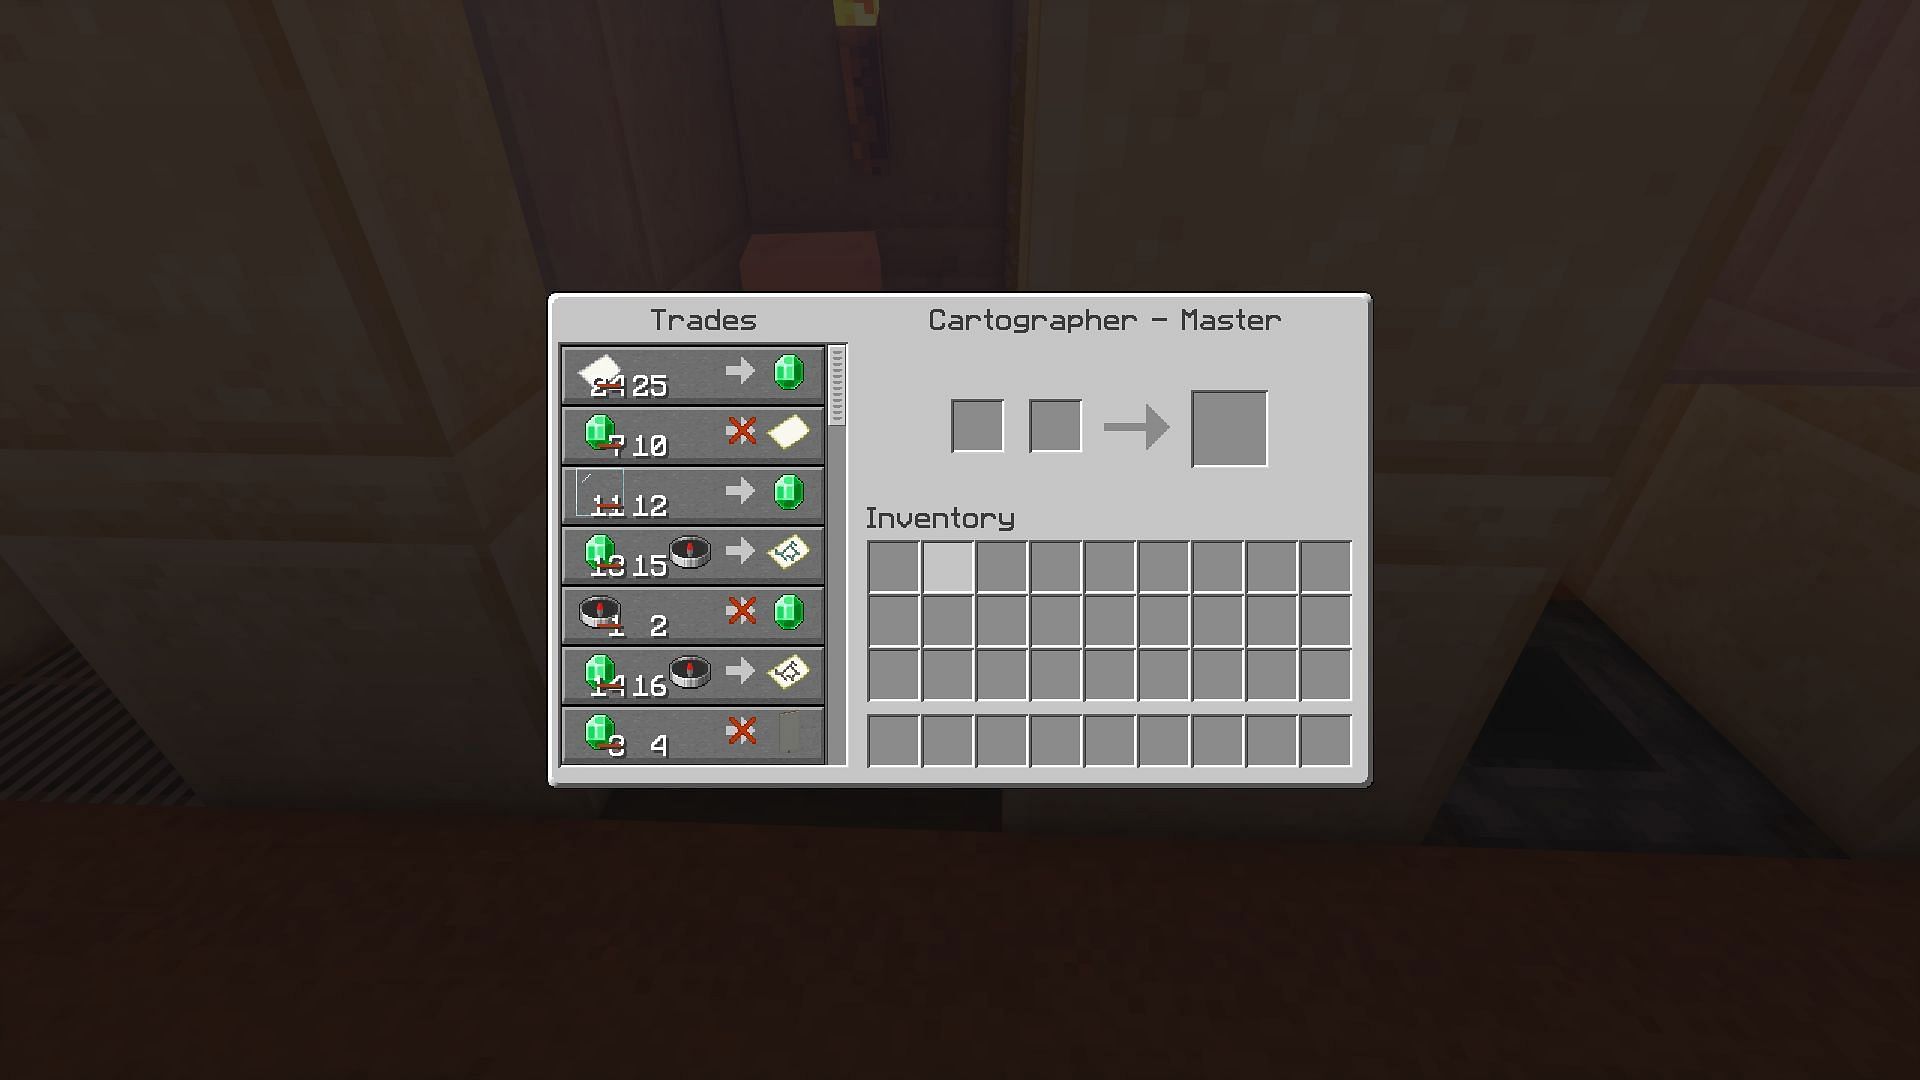 The trades offered by a cartographer (Image via Minecraft)